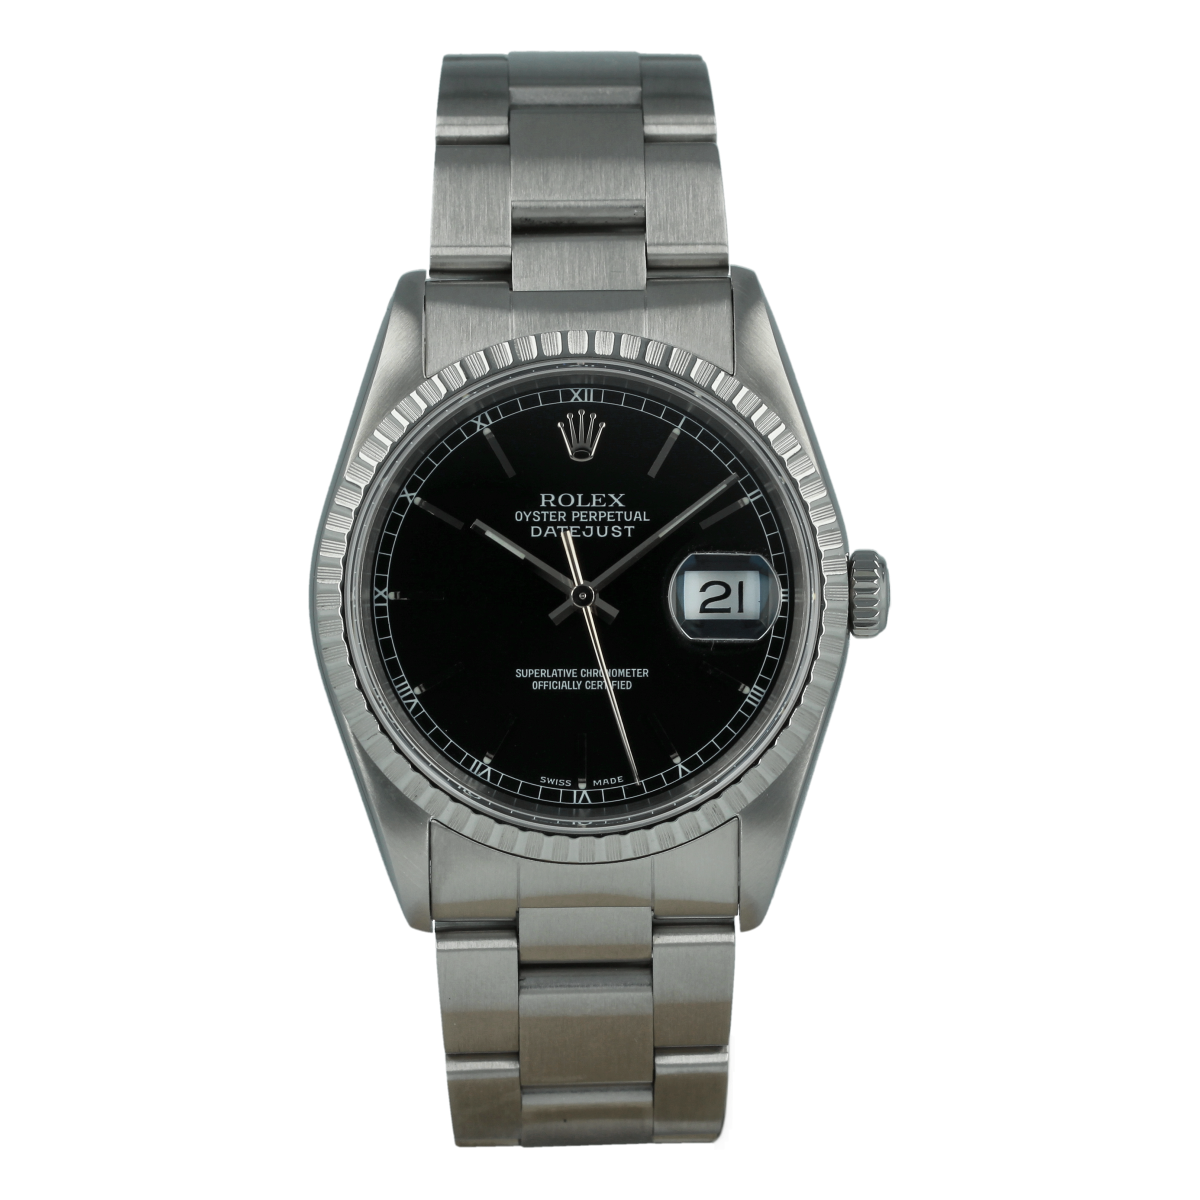 Buy pre-owned Rolex watch | AP Watches | Trading of watches from 